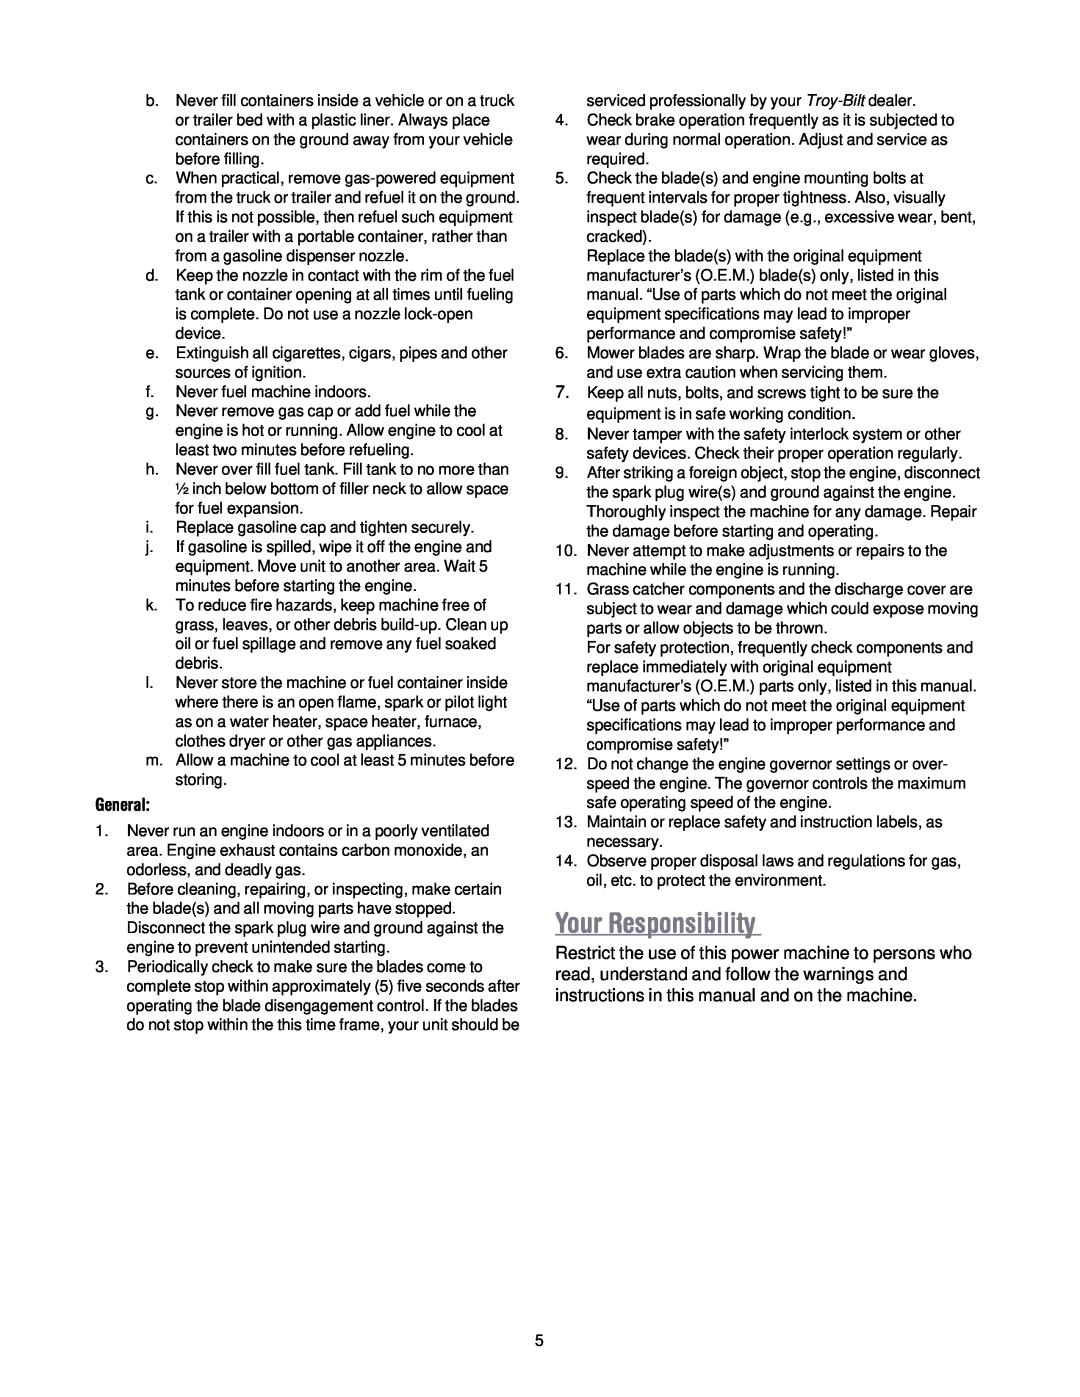 MTD 604H manual Your Responsibility, General 